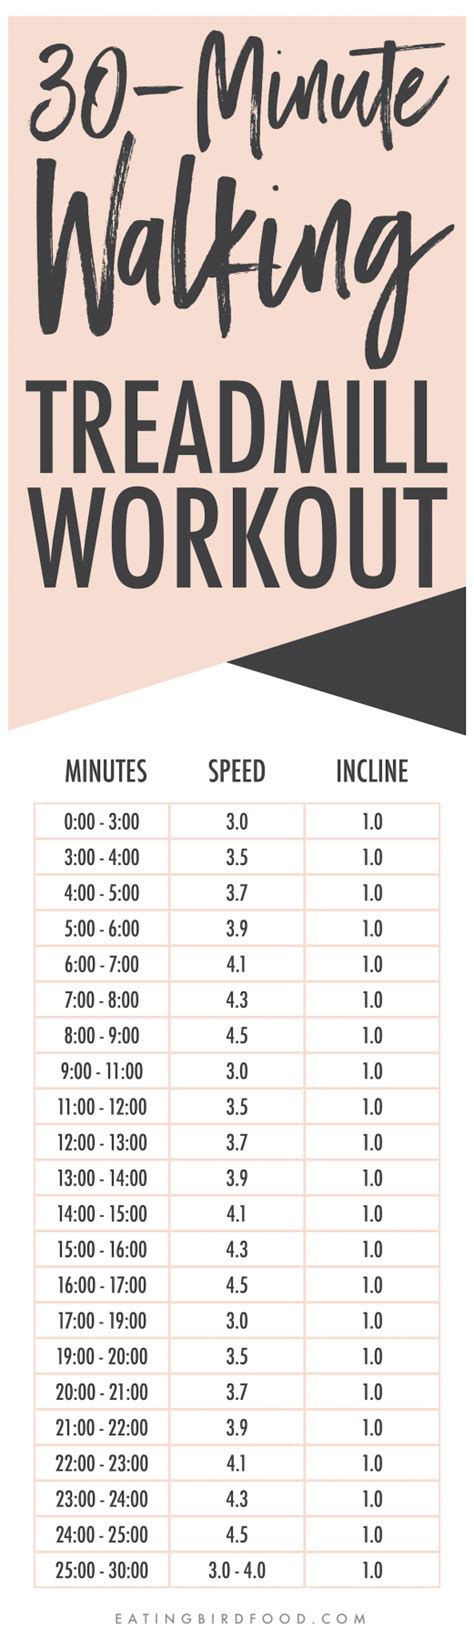 Get In An Awesome Cardio Session That Goes By Super Fast With This 30